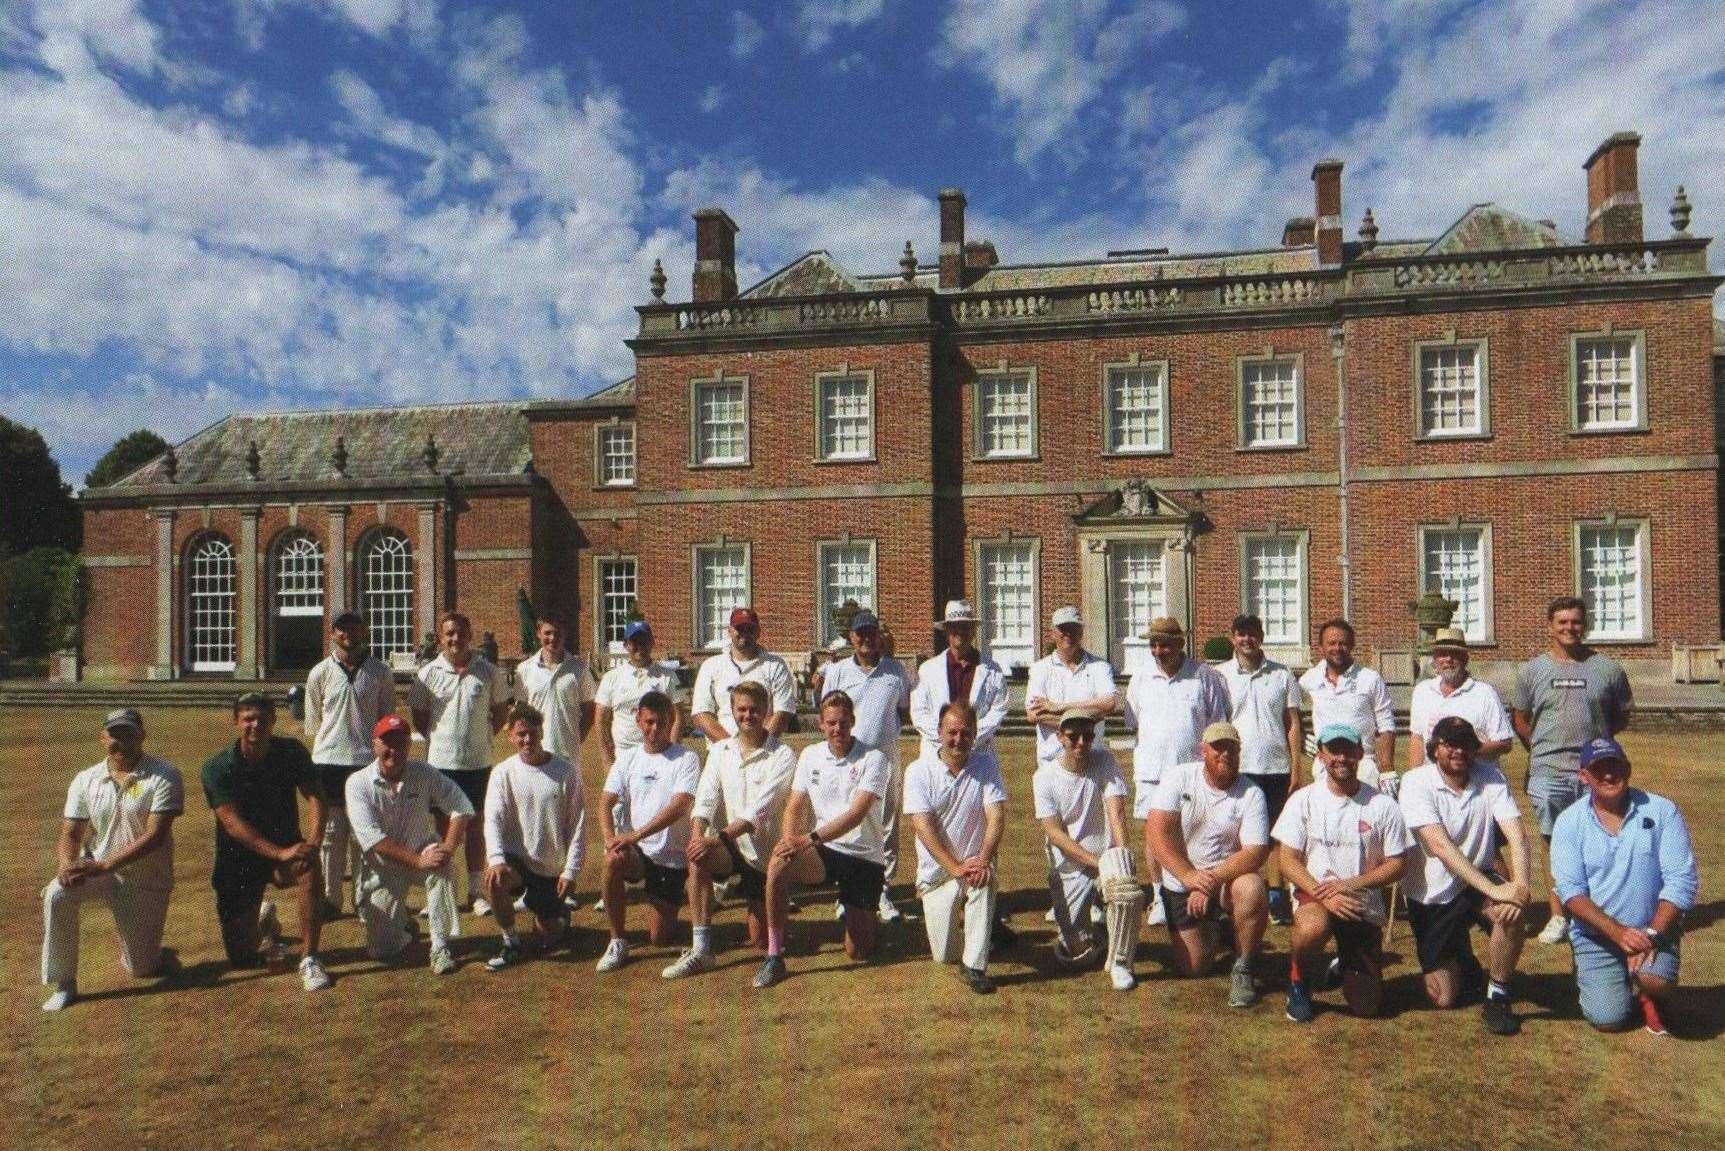 Cricketers who appear on the front cover of Ian Lambert's book outside the main house at Godmersham Park Estate